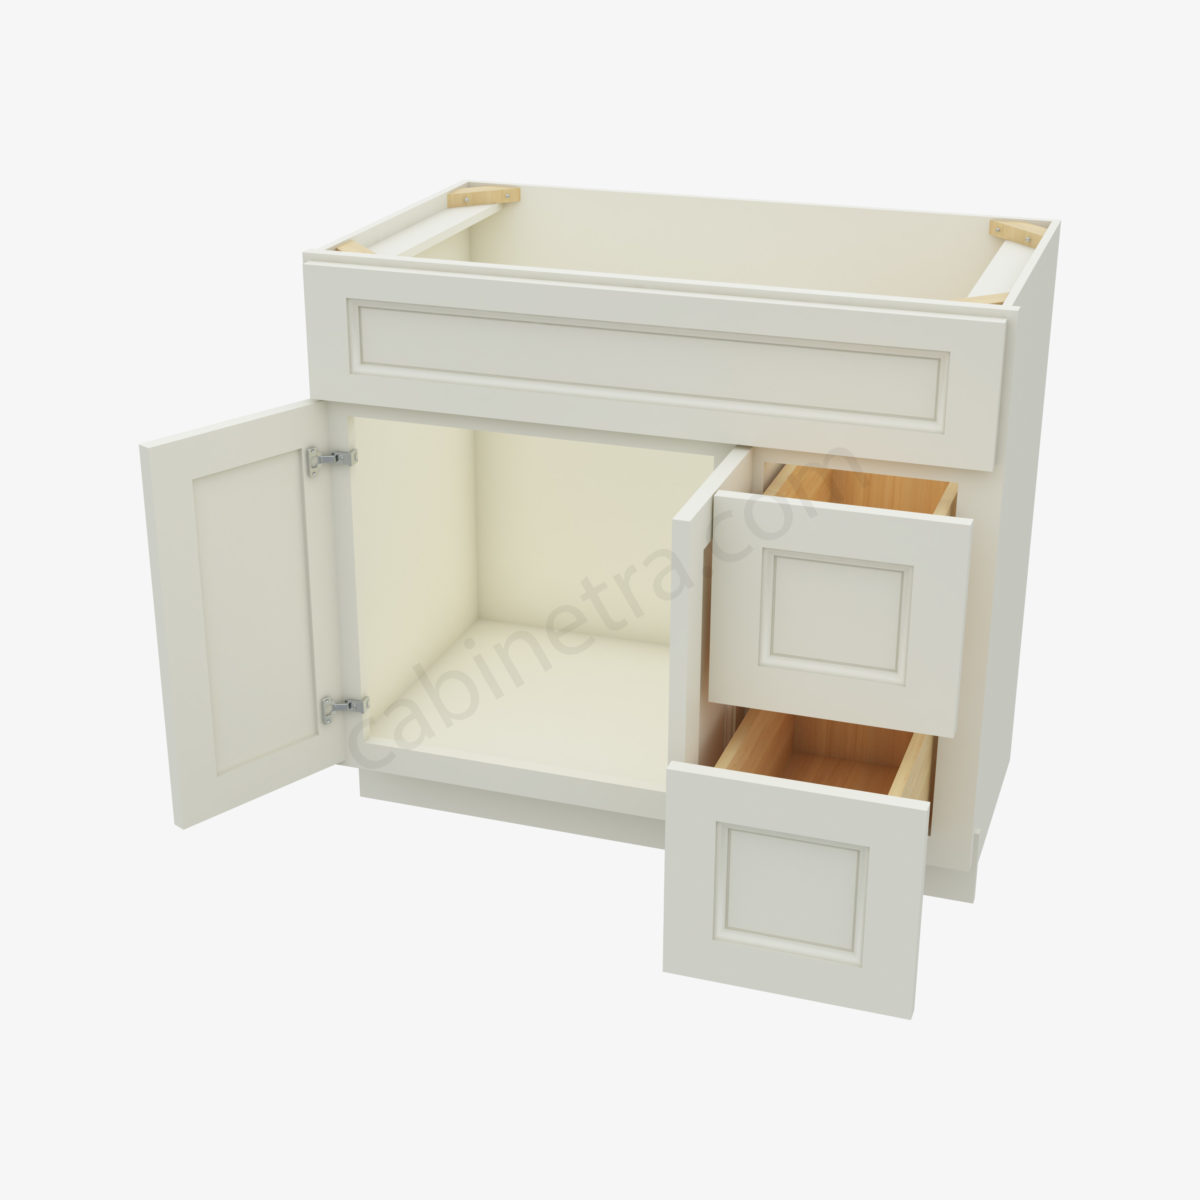 TQ S3621BDR 34 5 Forevermark Townplace Crema Cabinetra scaled